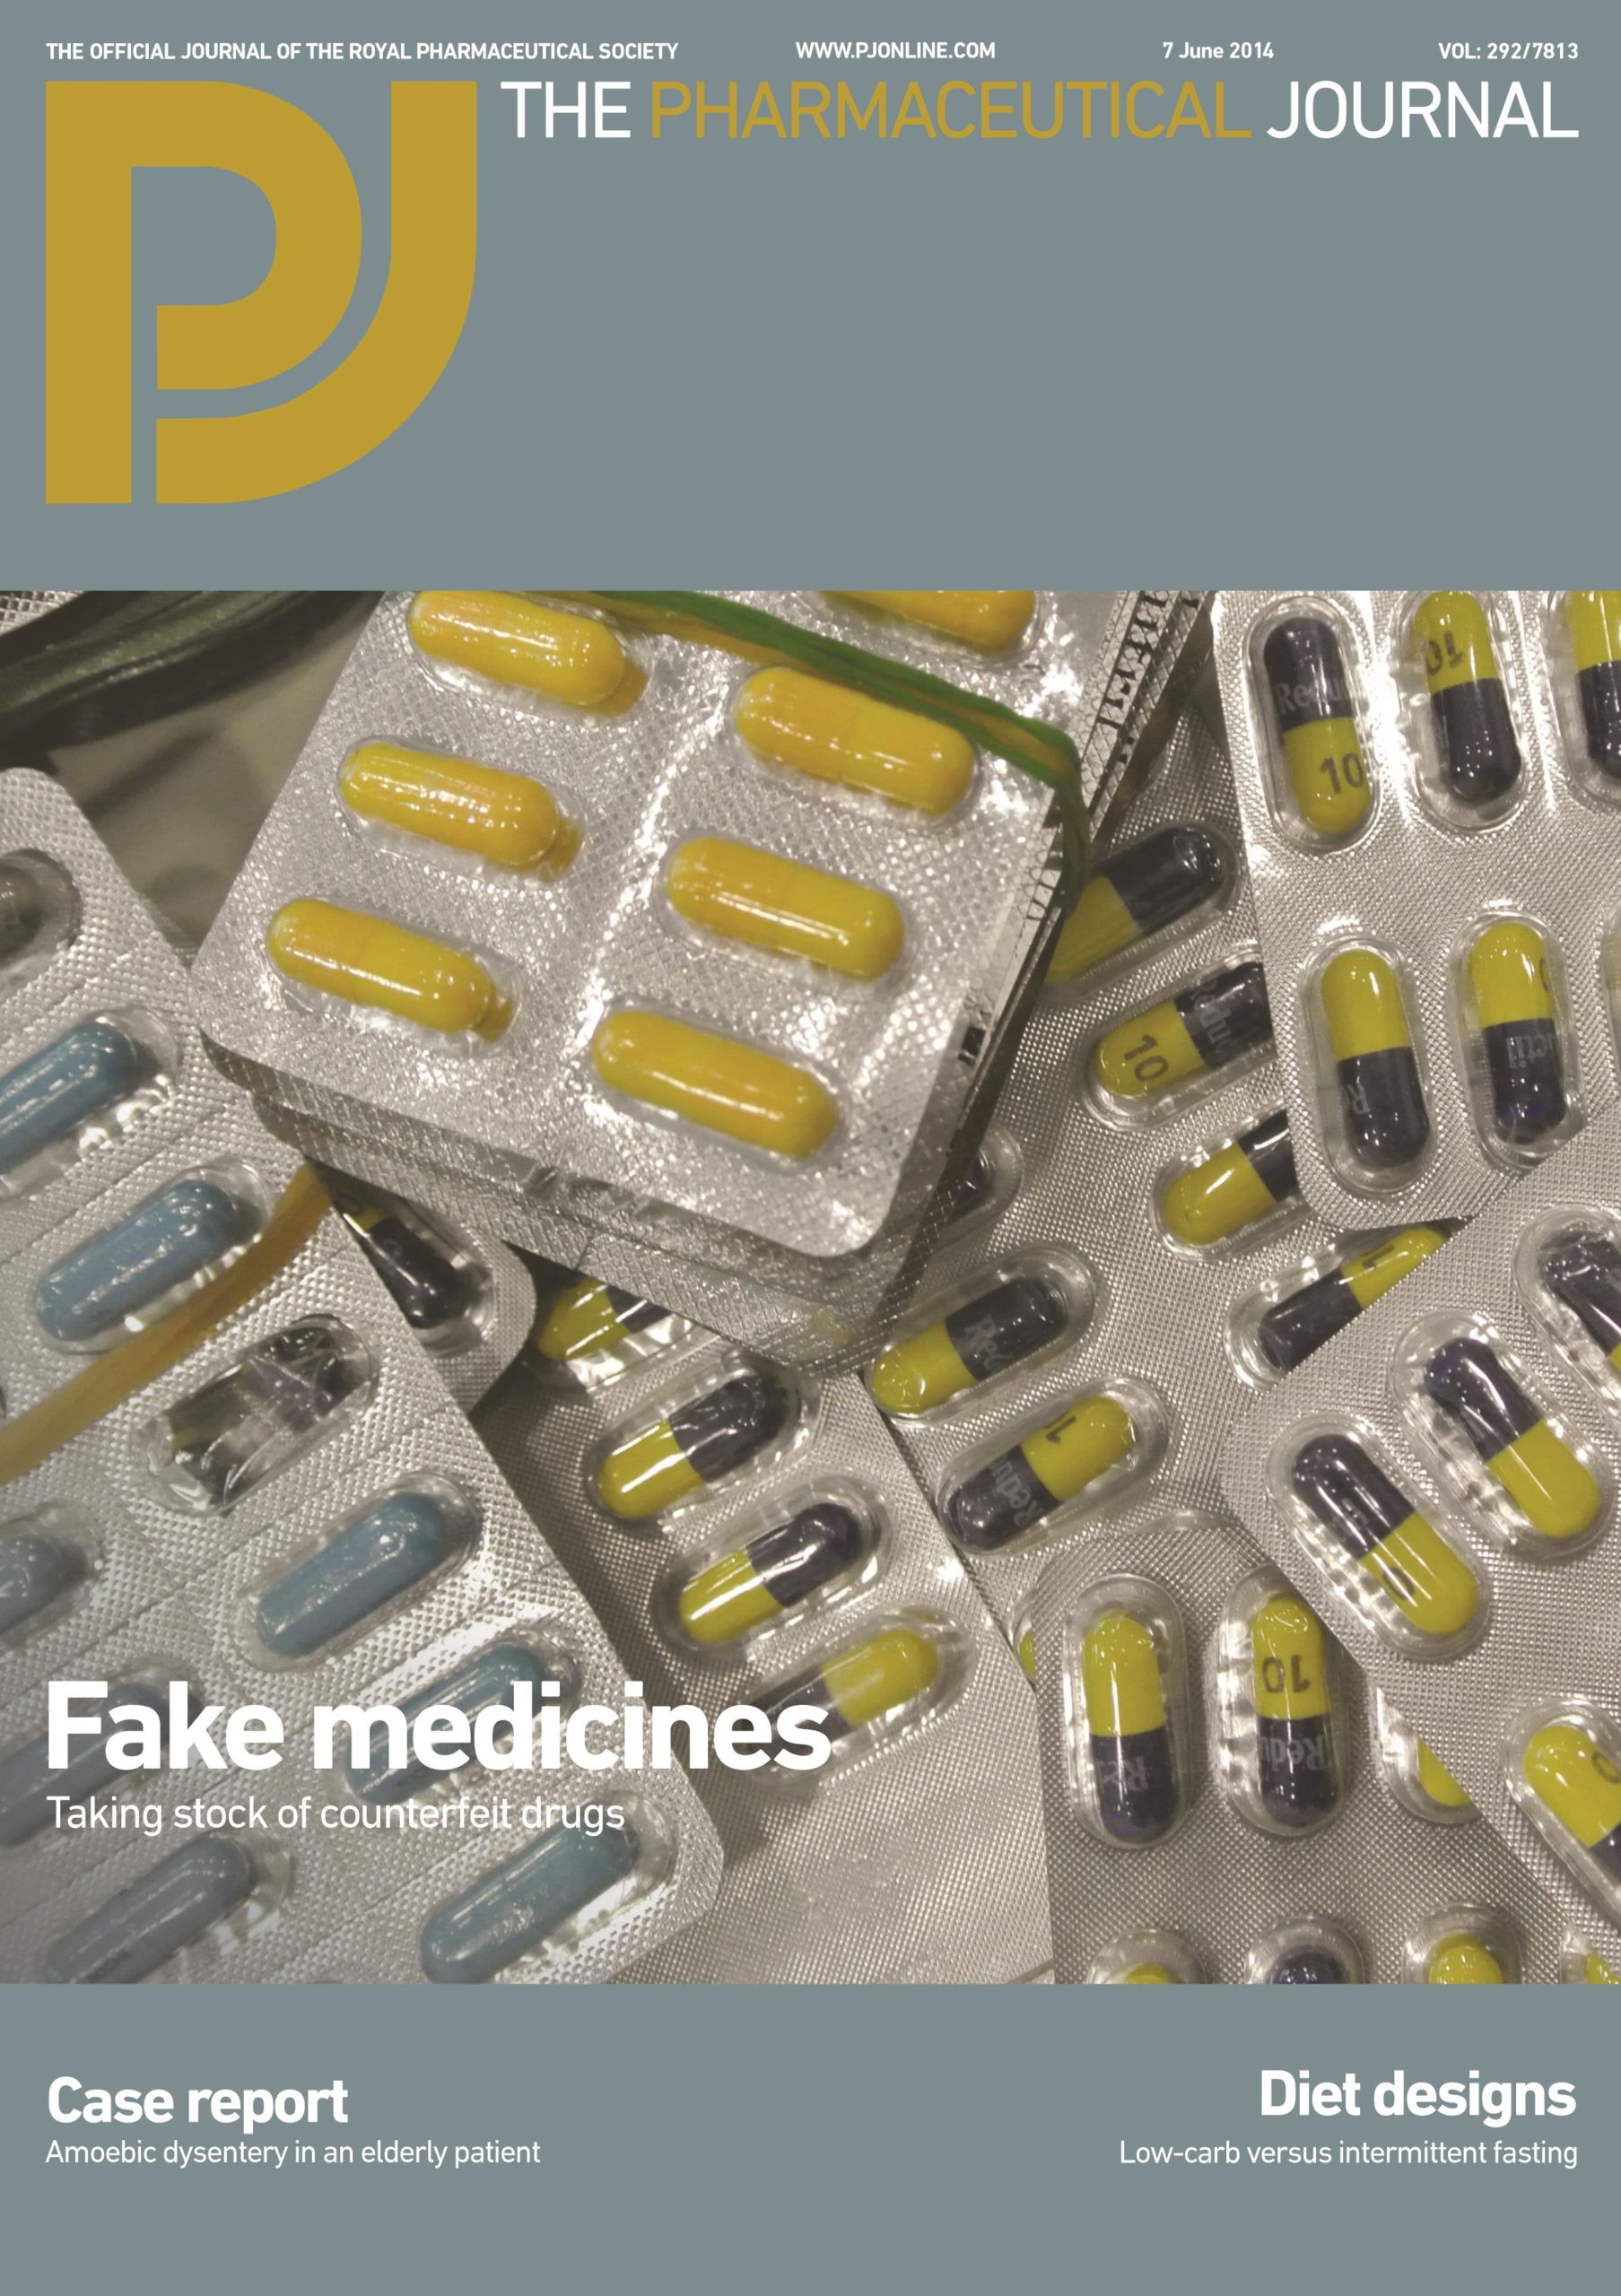 Publication issue cover for PJ, 7 June 2014, Vol 292, No 7813